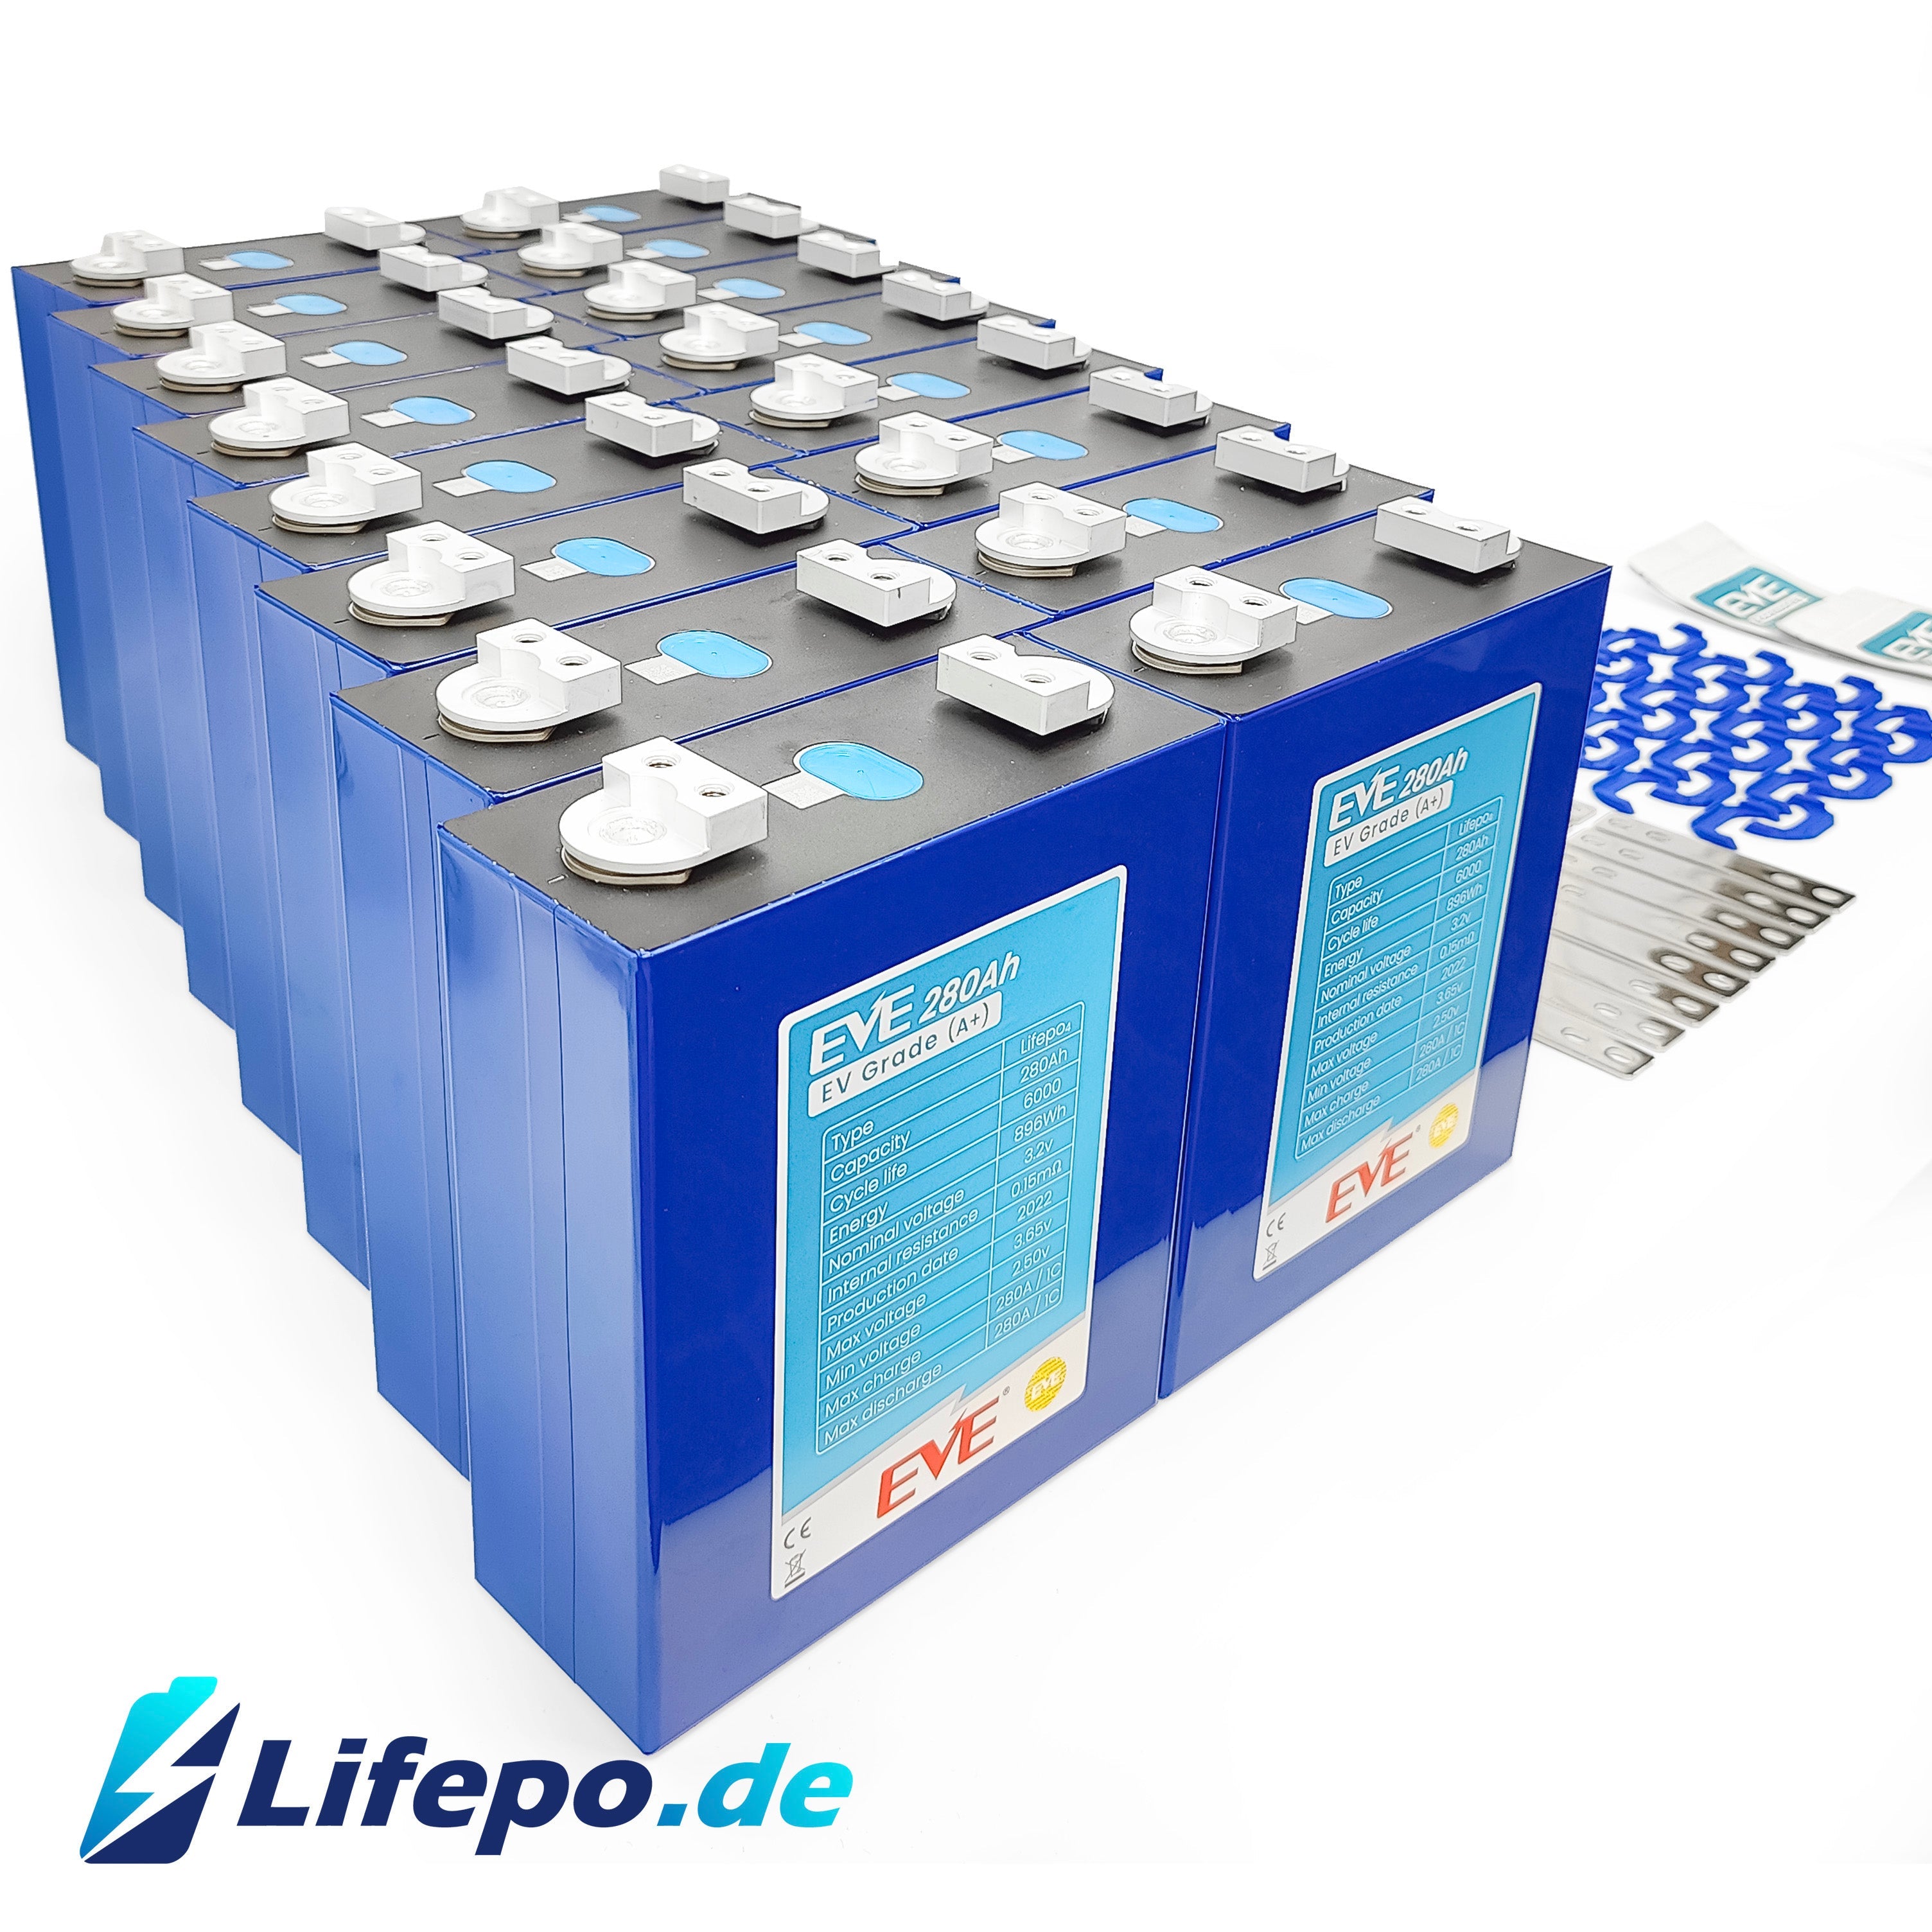 0% VAT 48v 280Ah Lifepo4 battery system with EVE Grade A+ 15.2kWh